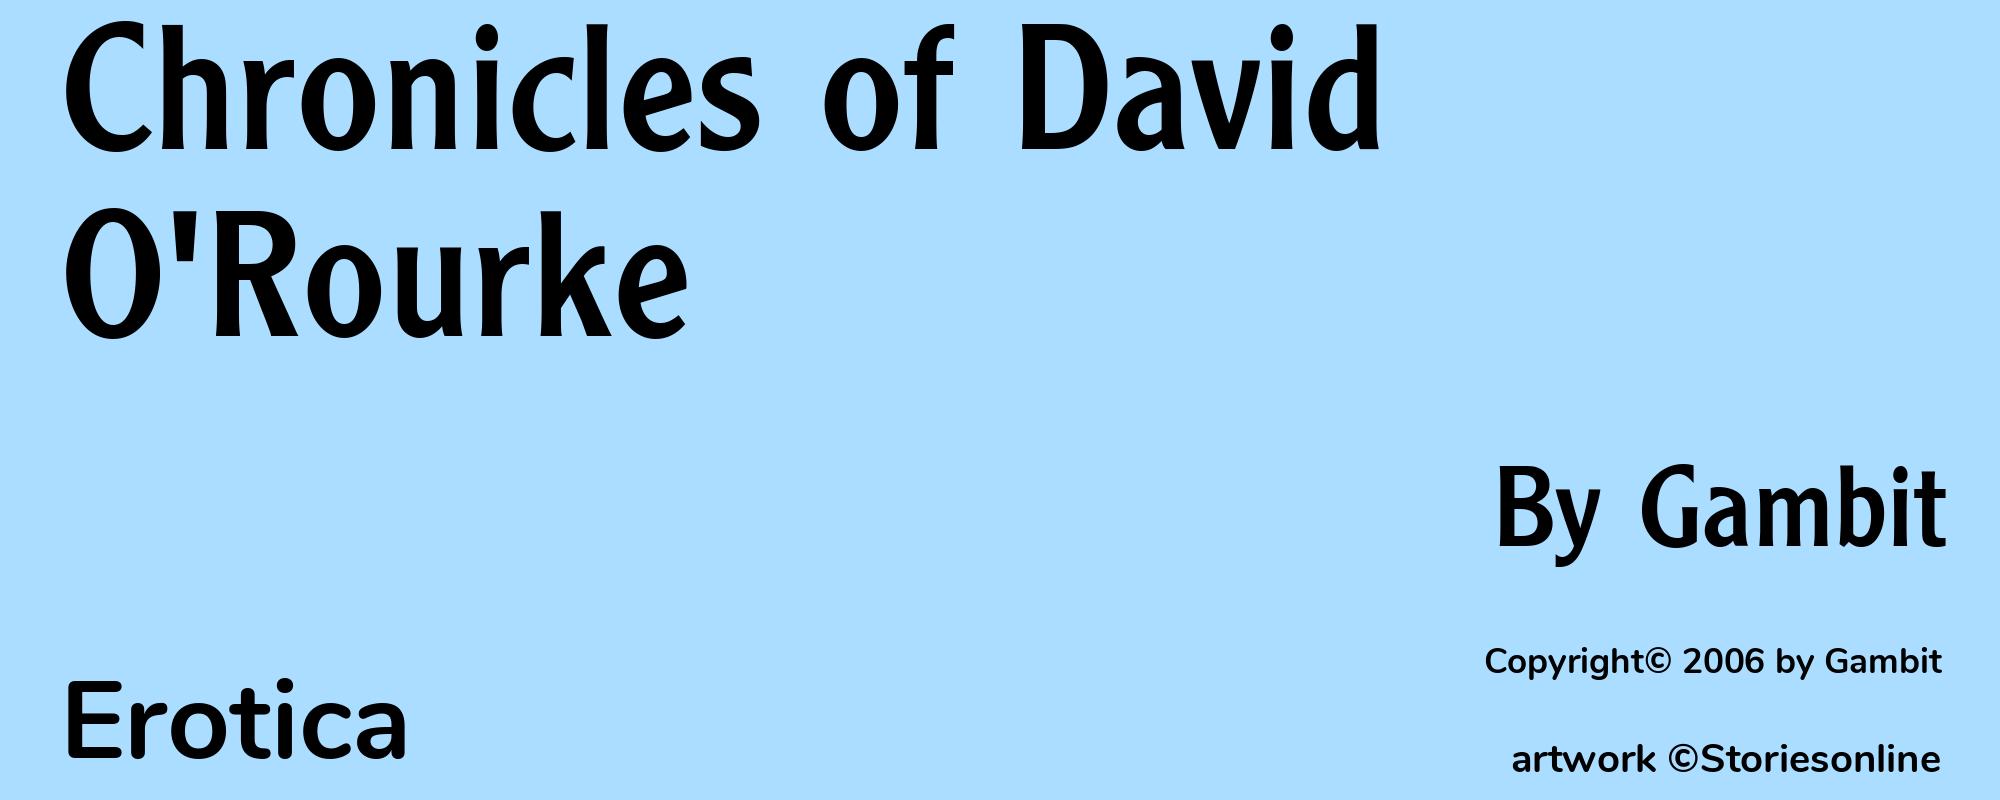 Chronicles of David O'Rourke - Cover